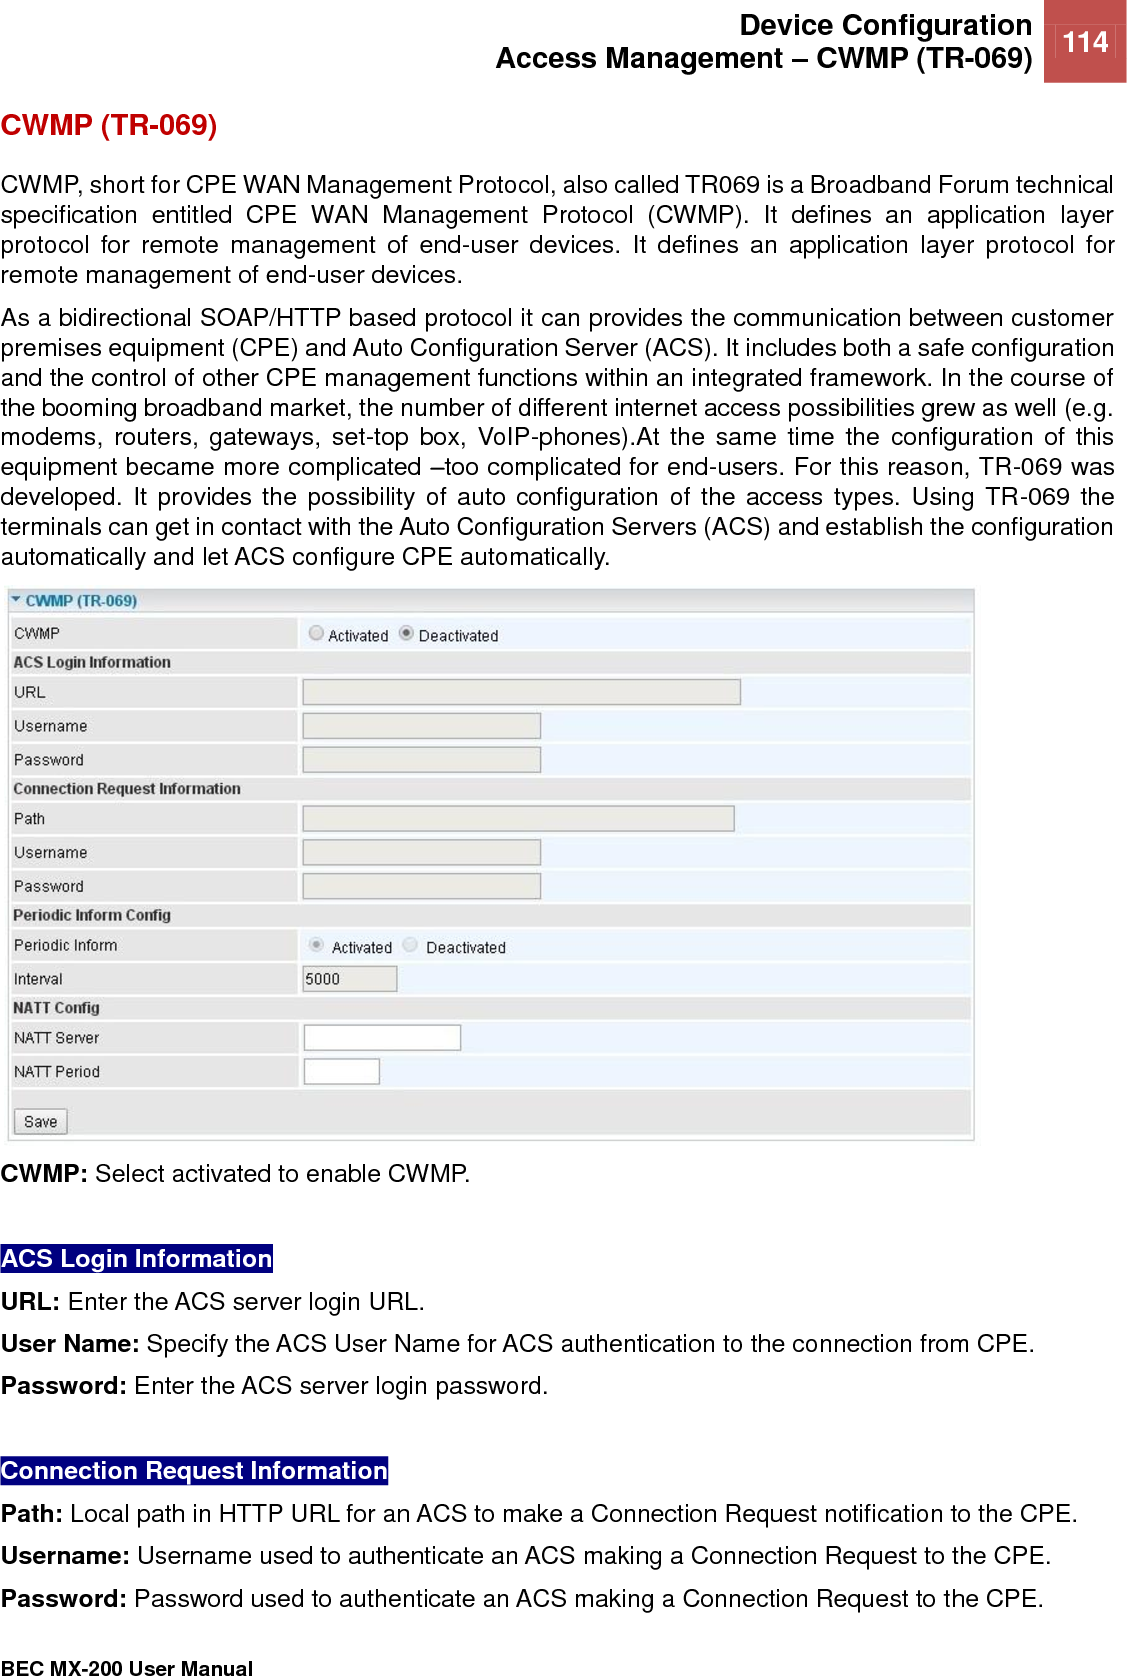  Device Configuration Access Management – CWMP (TR-069) 114   BEC MX-200 User Manual  CWMP (TR-069) CWMP, short for CPE WAN Management Protocol, also called TR069 is a Broadband Forum technical specification  entitled  CPE  WAN  Management  Protocol  (CWMP).  It  defines  an  application  layer protocol  for  remote  management  of  end-user  devices.  It  defines  an  application  layer  protocol  for remote management of end-user devices.  As a bidirectional SOAP/HTTP based protocol it can provides the communication between customer premises equipment (CPE) and Auto Configuration Server (ACS). It includes both a safe configuration and the control of other CPE management functions within an integrated framework. In the course of the booming broadband market, the number of different internet access possibilities grew as well (e.g. modems,  routers,  gateways, set-top  box, VoIP-phones).At the  same time the  configuration of  this equipment became more complicated –too complicated for end-users. For this reason, TR-069 was developed. It provides the possibility of auto configuration of the access types. Using TR-069  the terminals can get in contact with the Auto Configuration Servers (ACS) and establish the configuration automatically and let ACS configure CPE automatically.  CWMP: Select activated to enable CWMP.   ACS Login Information  URL: Enter the ACS server login URL.  User Name: Specify the ACS User Name for ACS authentication to the connection from CPE.  Password: Enter the ACS server login password.   Connection Request Information Path: Local path in HTTP URL for an ACS to make a Connection Request notification to the CPE.  Username: Username used to authenticate an ACS making a Connection Request to the CPE.  Password: Password used to authenticate an ACS making a Connection Request to the CPE.  